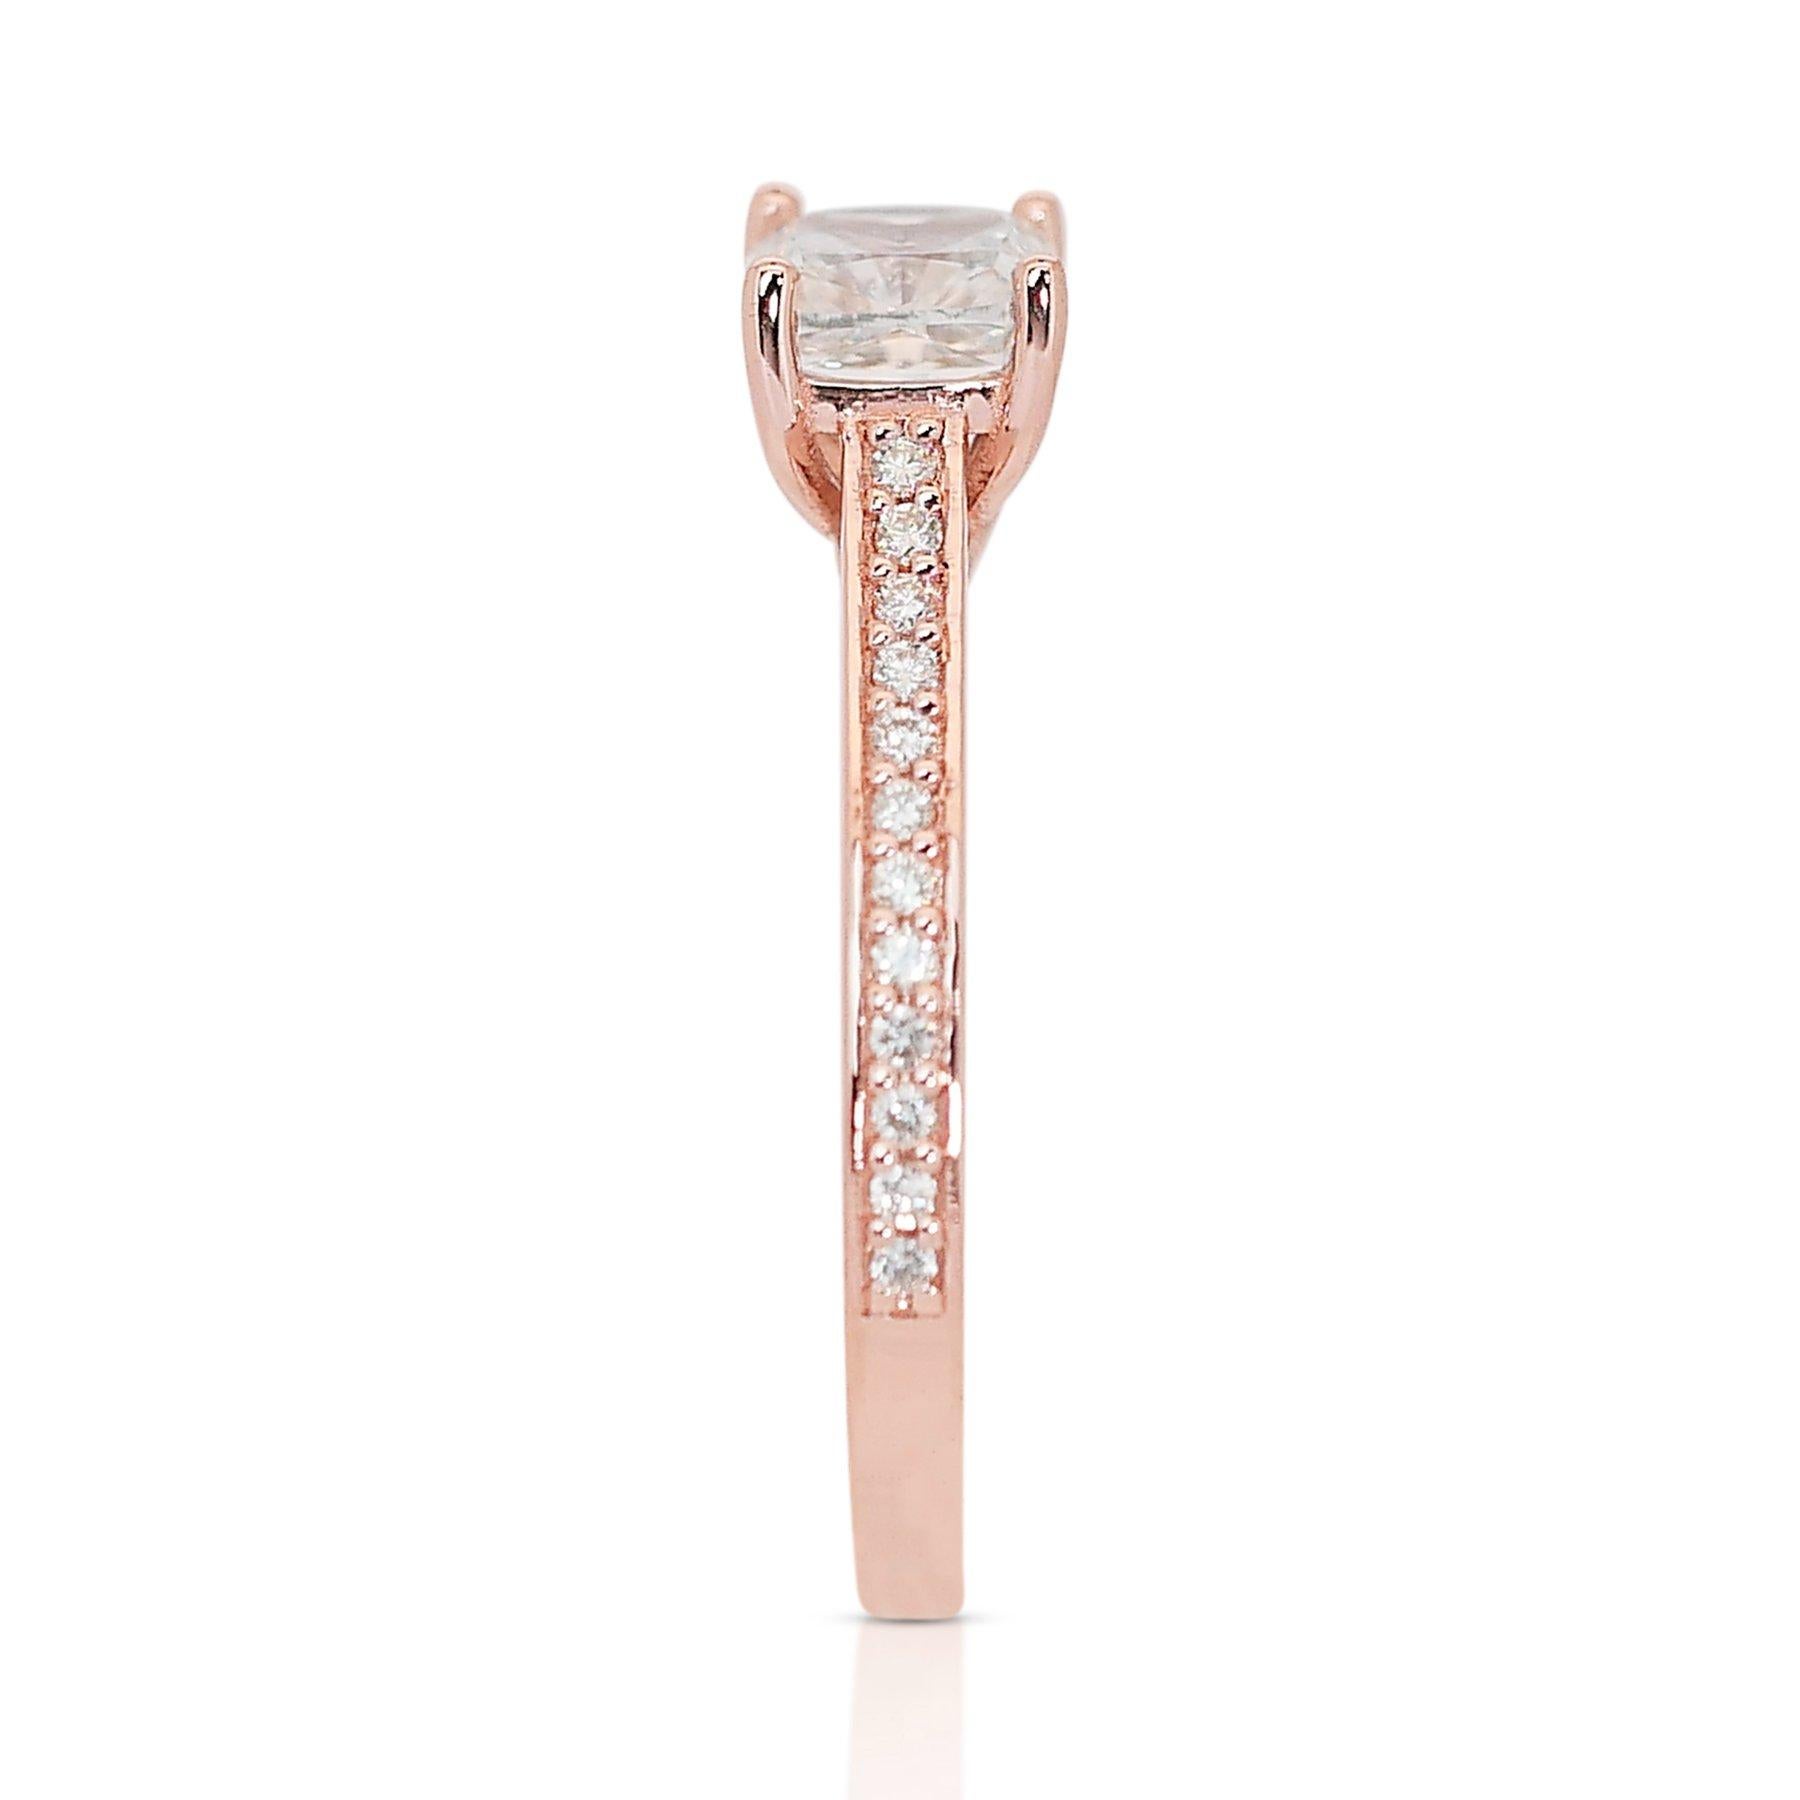 Radiant 1.17ct Diamond Pave Ring in 18k Rose Gold – GIA Certified

Experience the allure of understated elegance with this sophisticated 18k rose gold ring, showcasing a remarkable 1.00-carat cushion-cut main diamond. Sparkling alongside the center